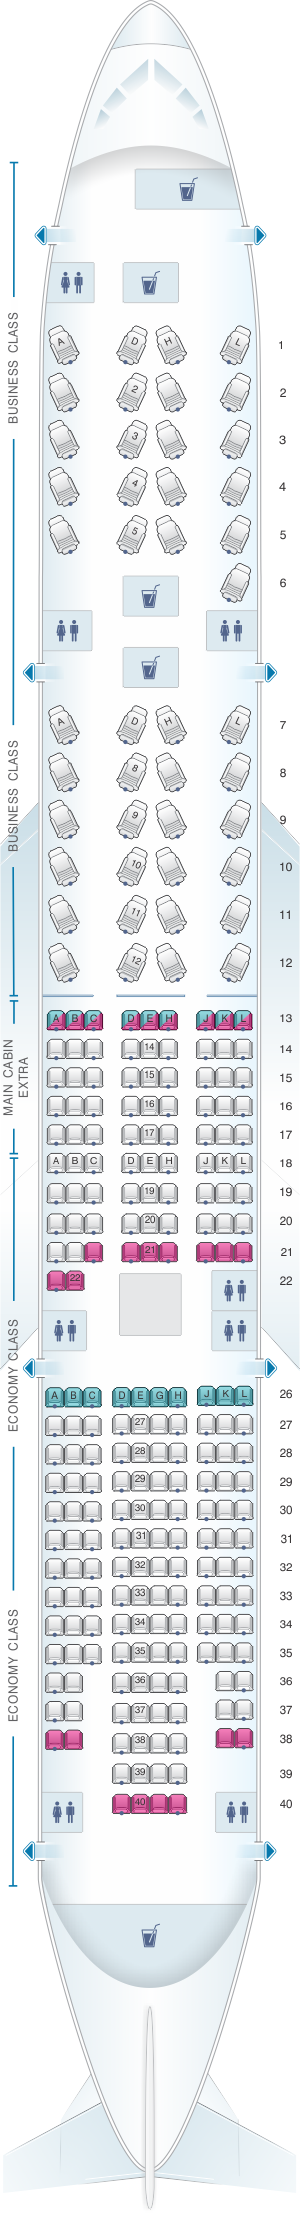 American Airlines Seating Chart 777 300